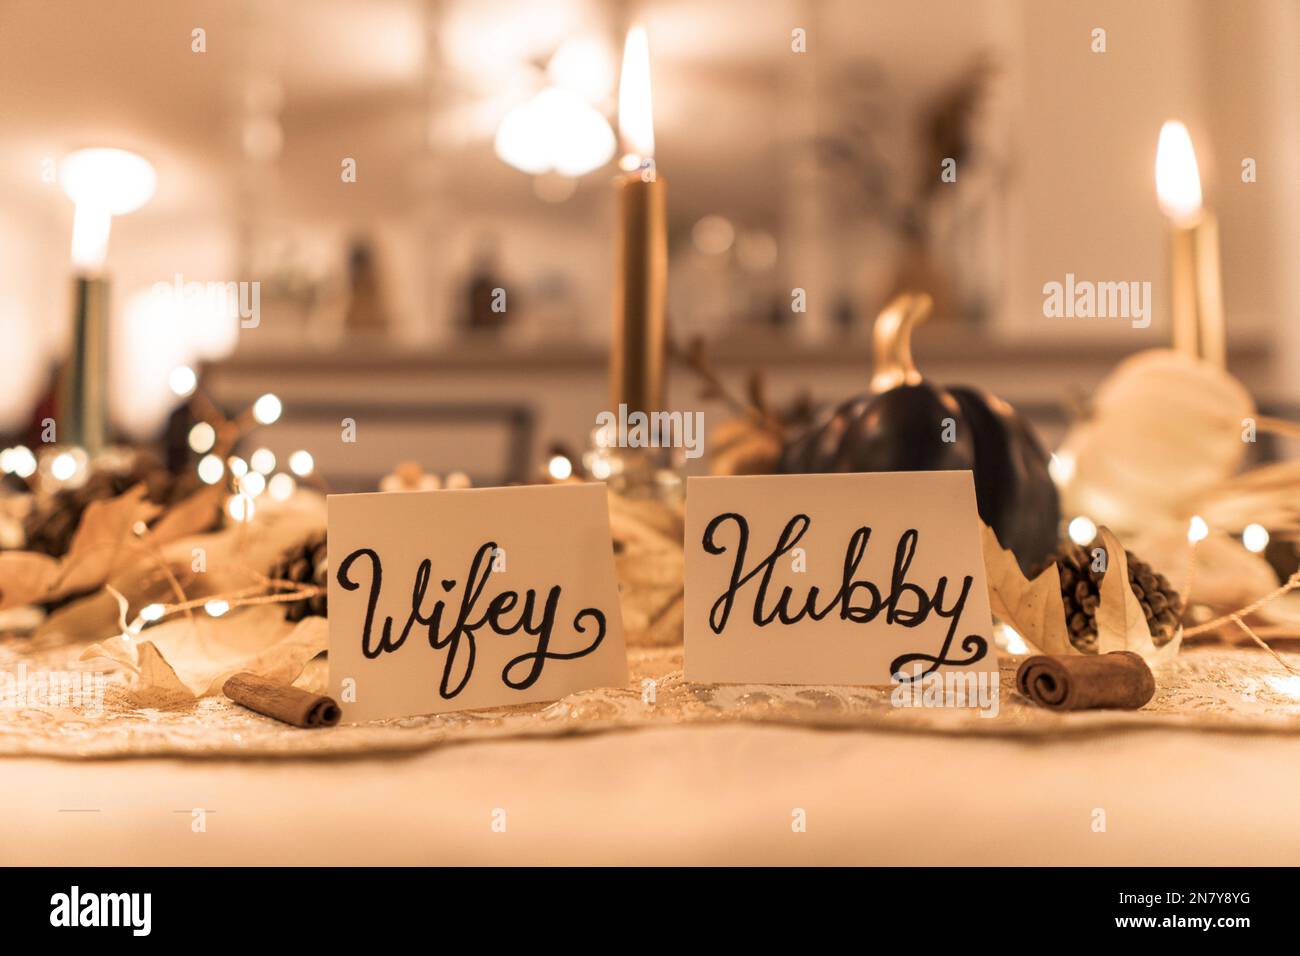 The Wifey and Hubby decorations put on the Thanksgiving dinner table on blurred background Stock Photo